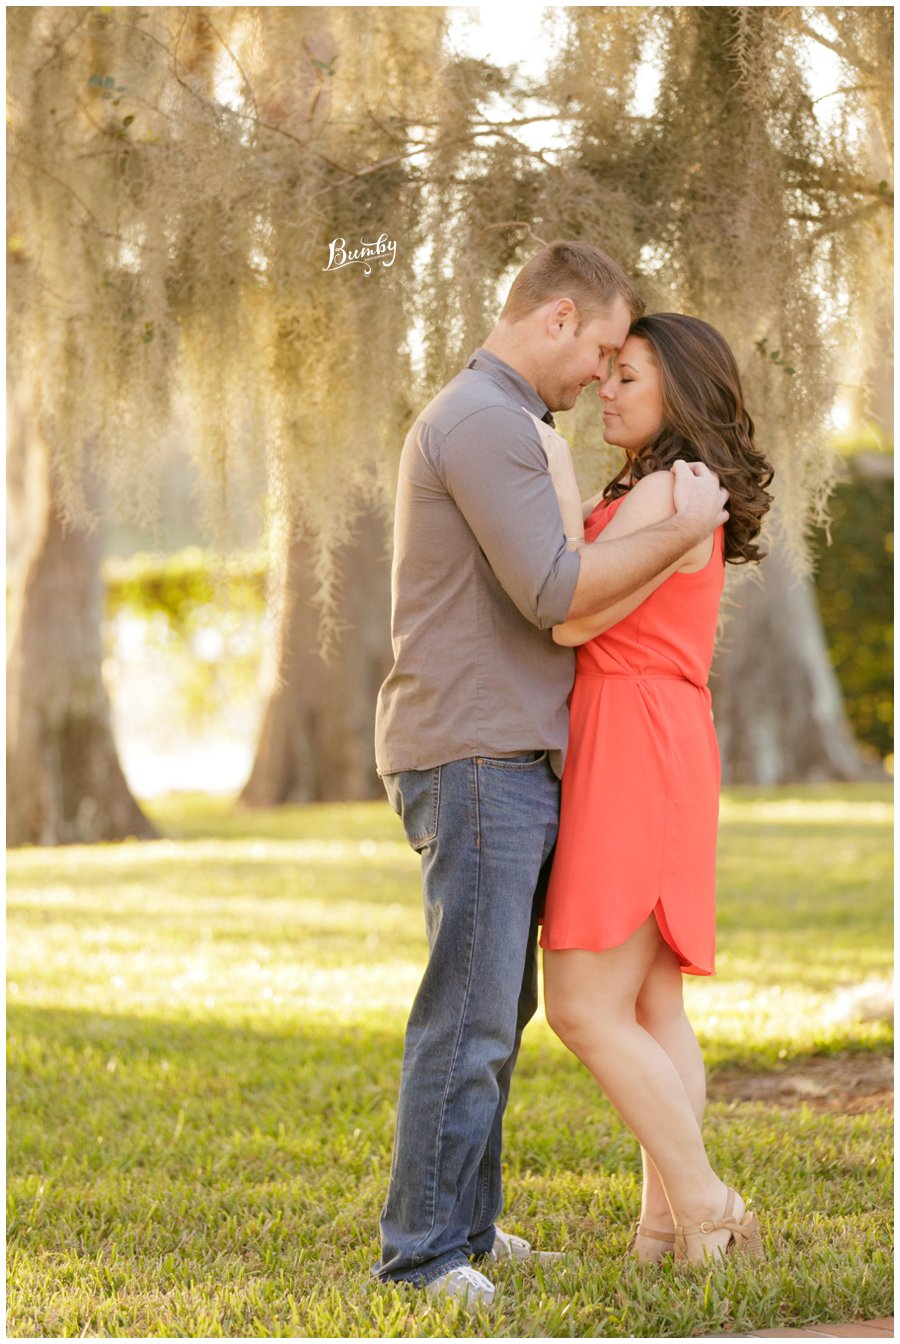 View More: http://bumbyphotography.pass.us/chelseadrewengaged